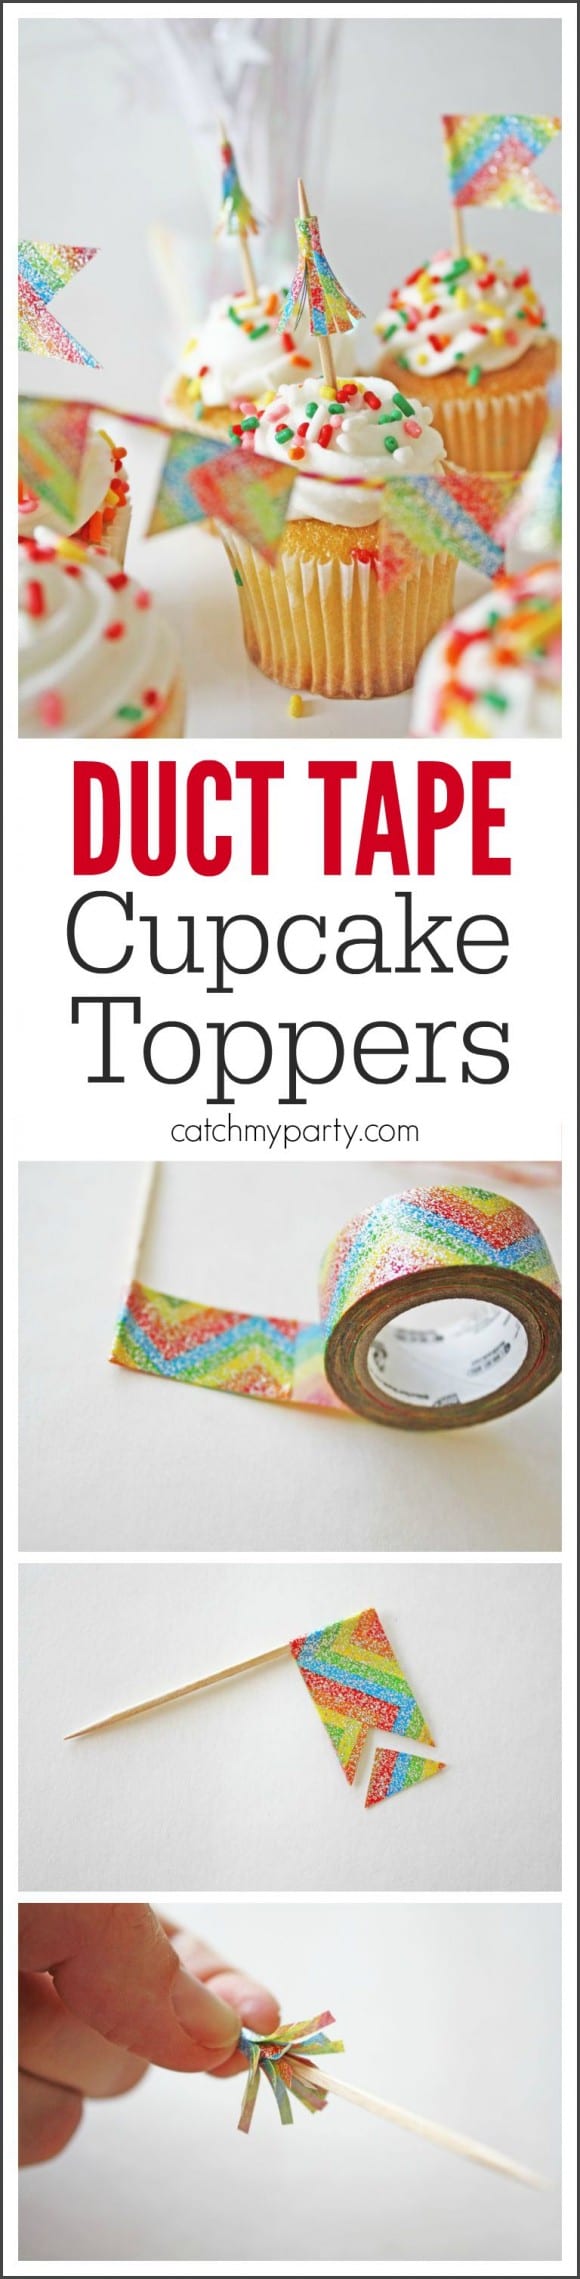 Duct Tape Cupcake Toppers DIY | CatchMyParty.com